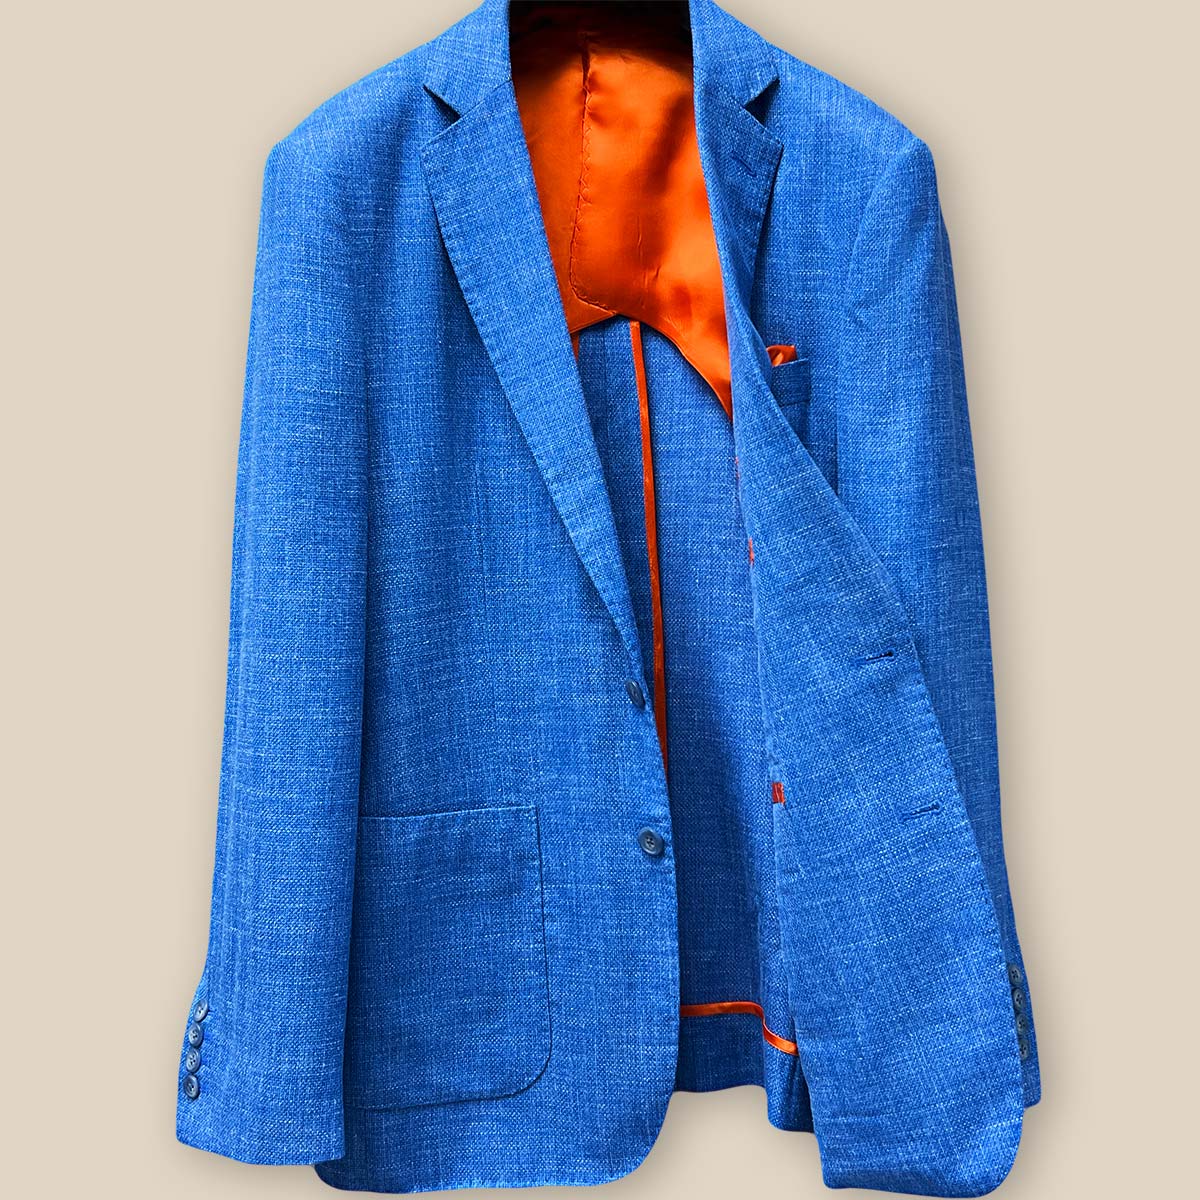 Inside view of the sportcoat's left side, featuring the vibrant bemberg orange lining and the detailed stitching craftsmanship.